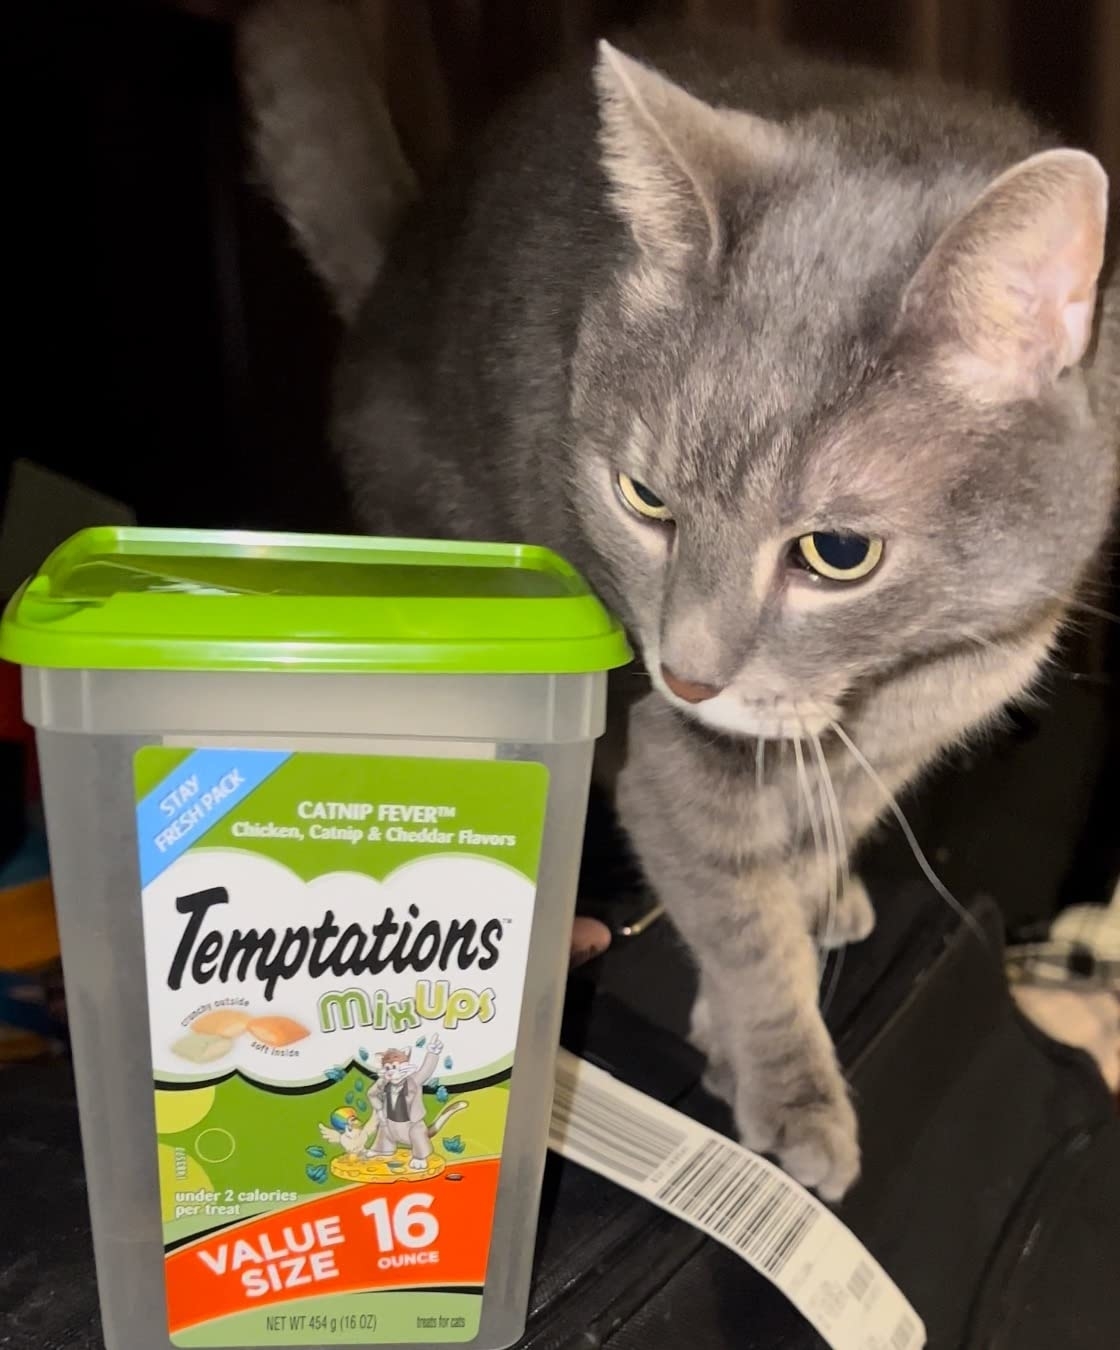 a cat next to the container of temptations treats